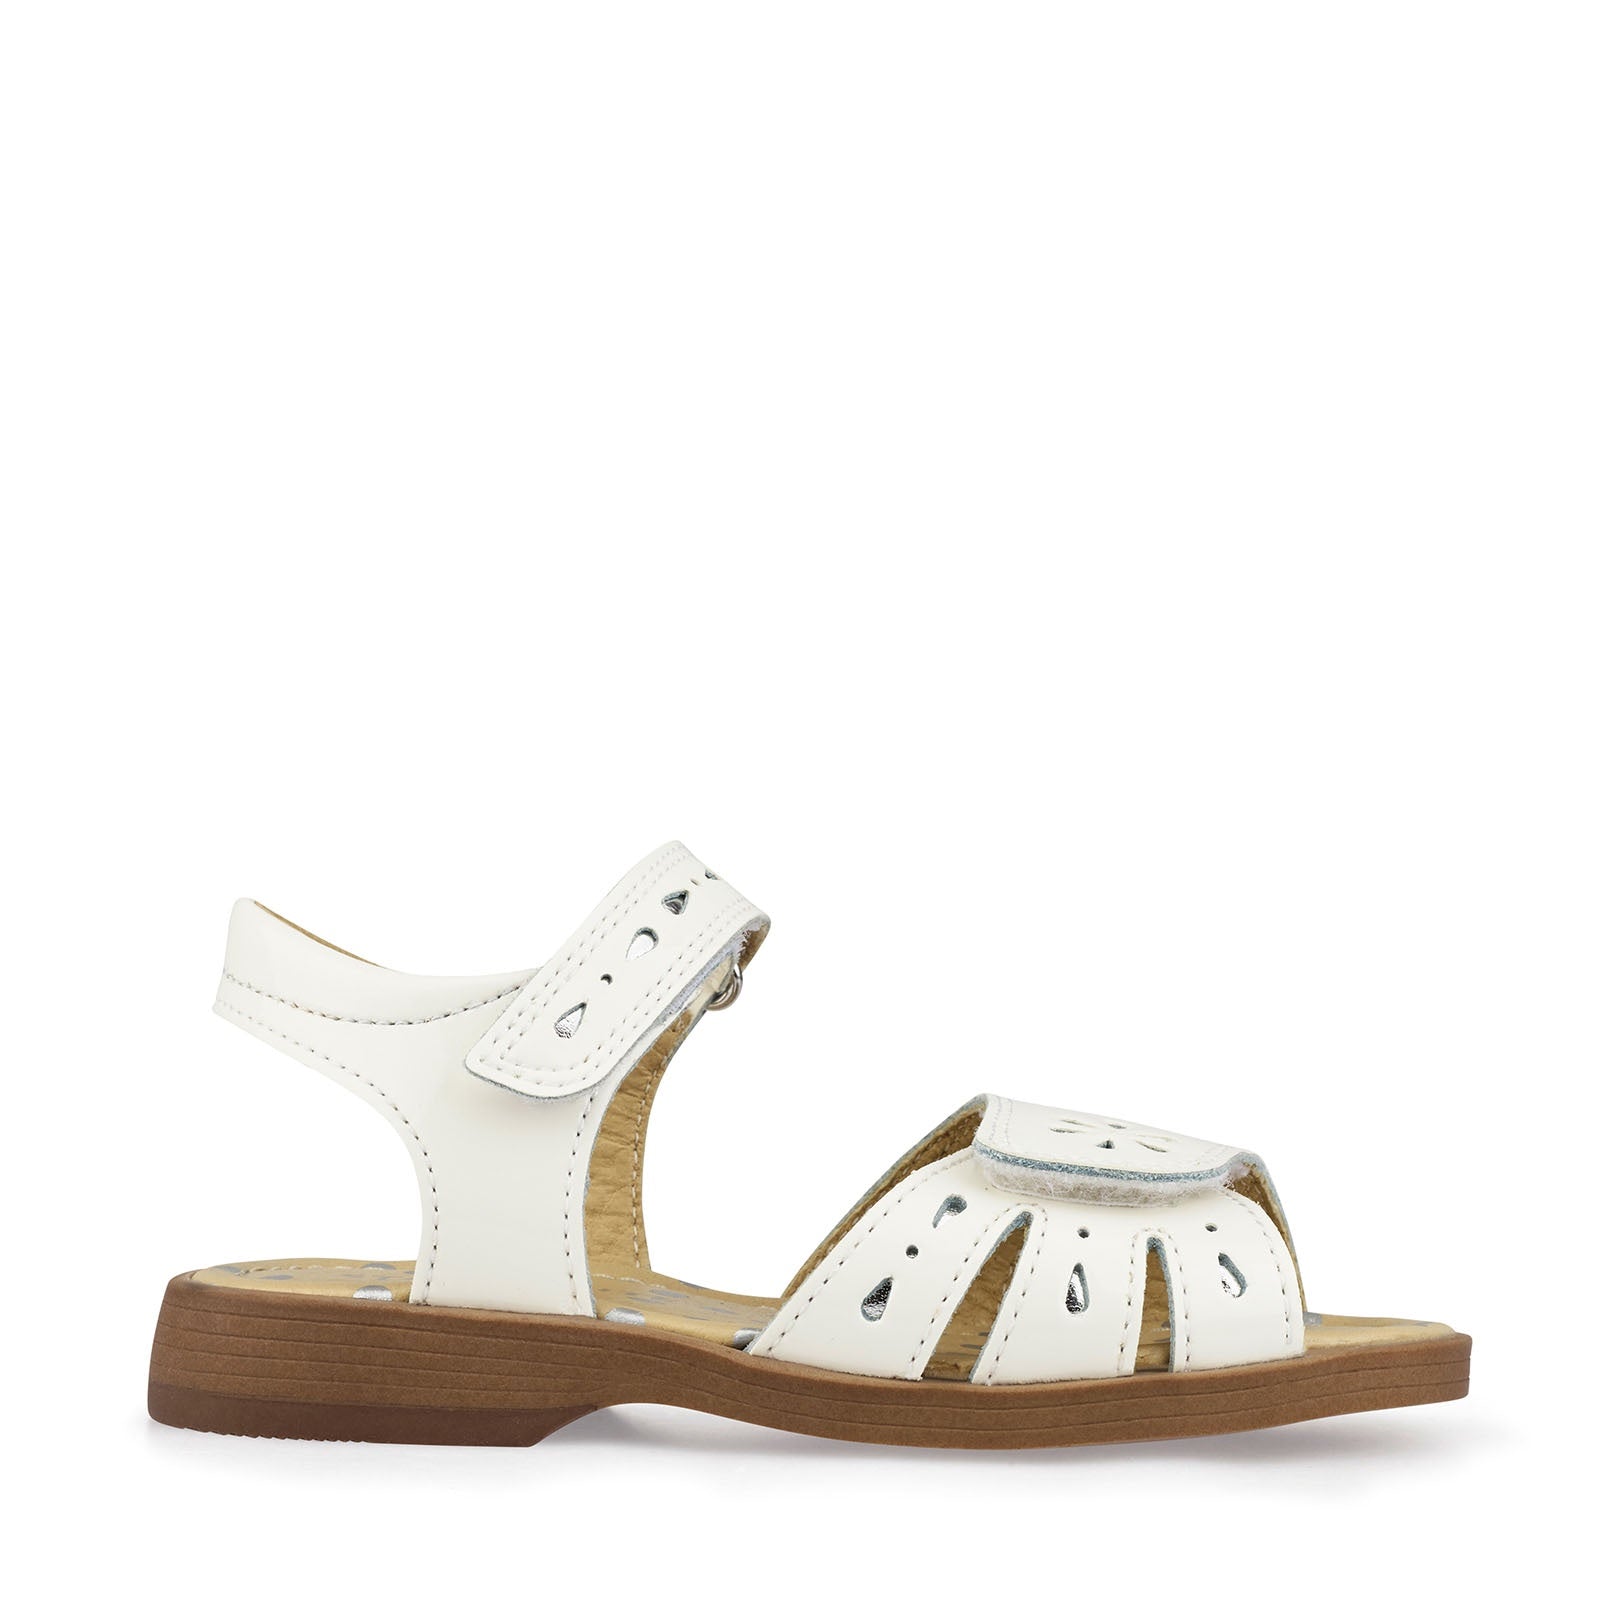 Start-Rite Flutter 5182-4 Girls White Patent Leather Summer Sandals F fit - elevate your sole